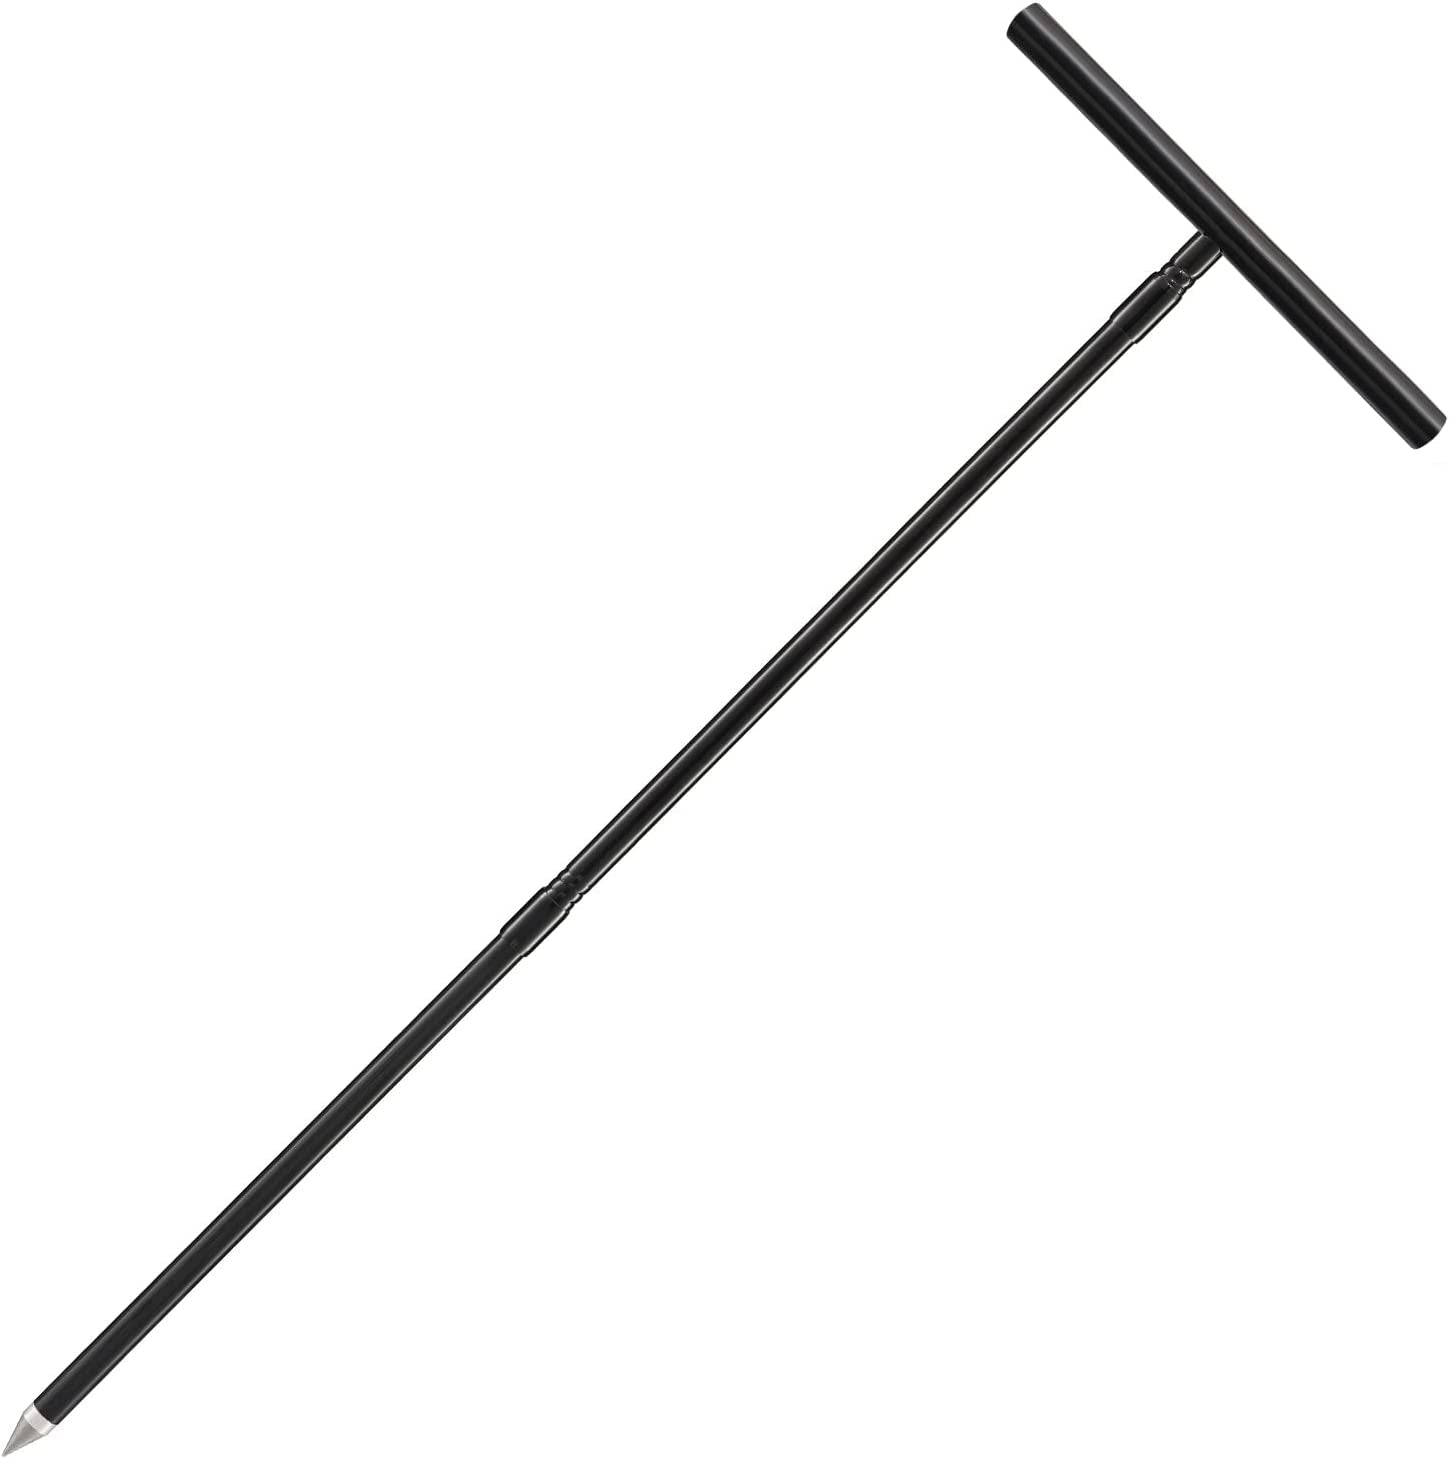 PoPoHoser, Soil Probe Rod 48 Inch, T-Handle Long Ground Probe Rod for Locating Septic Tanks, Plumbing Underground Pipes, Water Mains